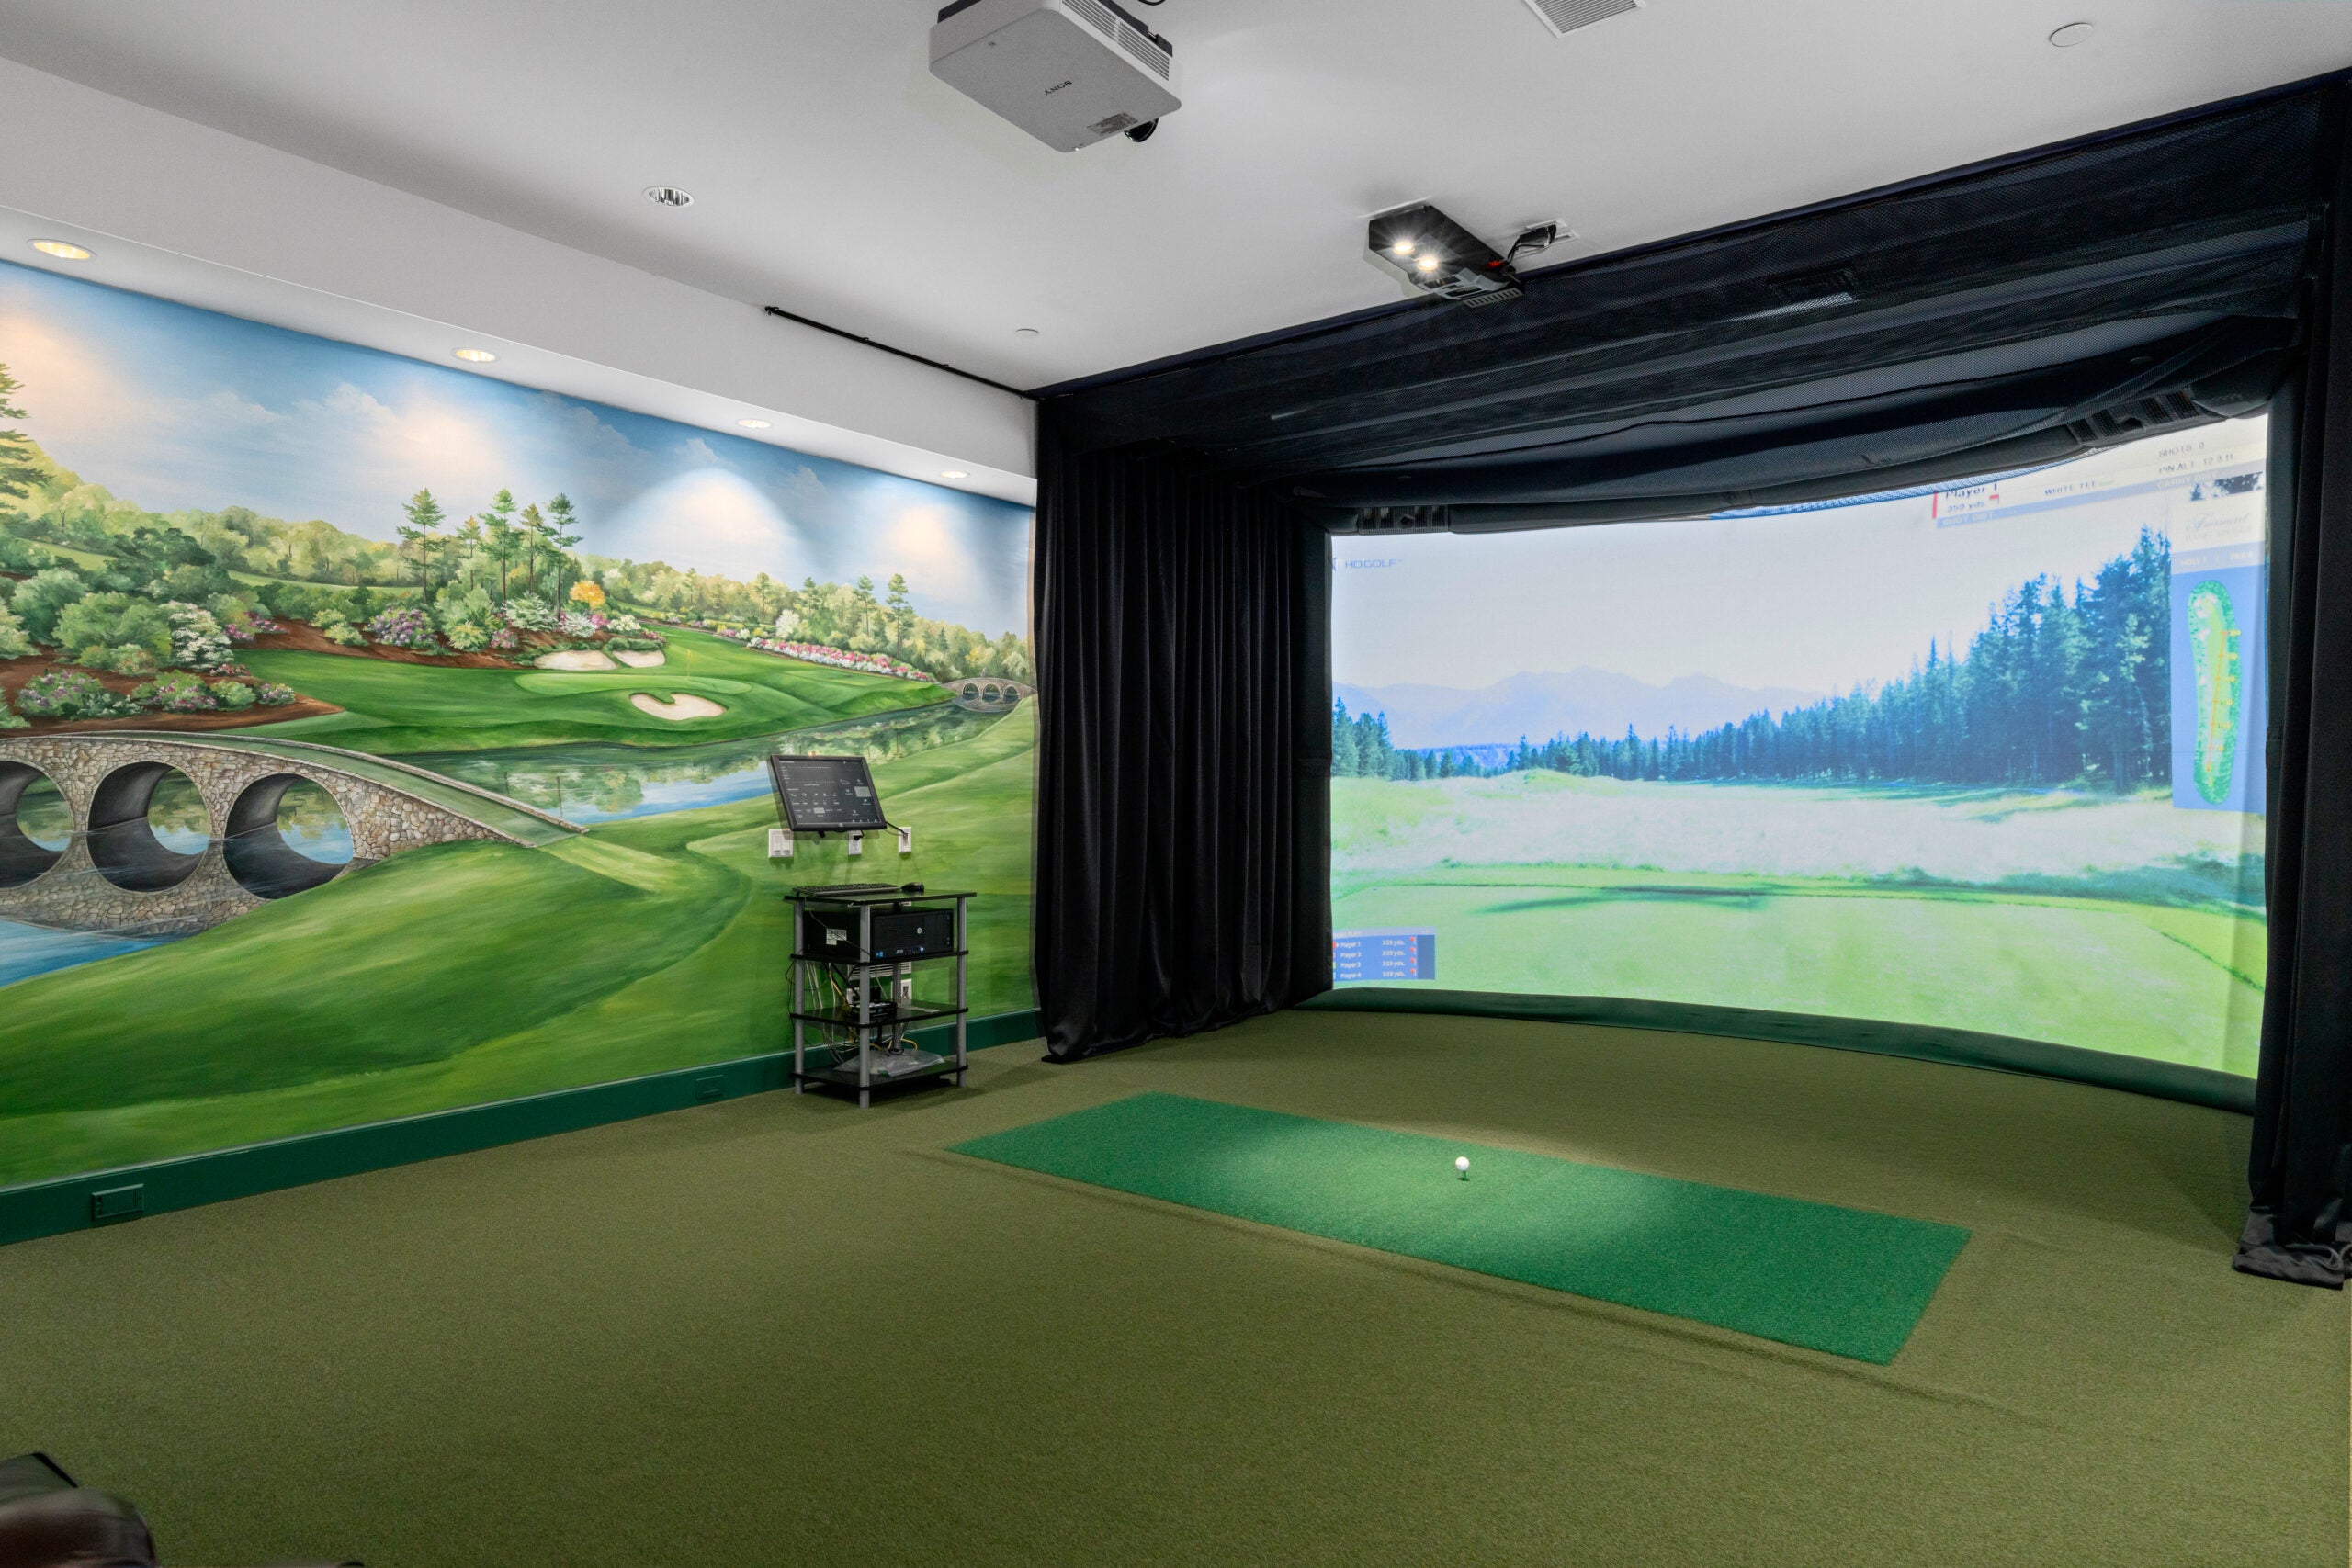 A golf simulator room with the projection of a fairway on the screen. The flooring is a grass-colored carpet. There is painted mural of a golf hole off the left.